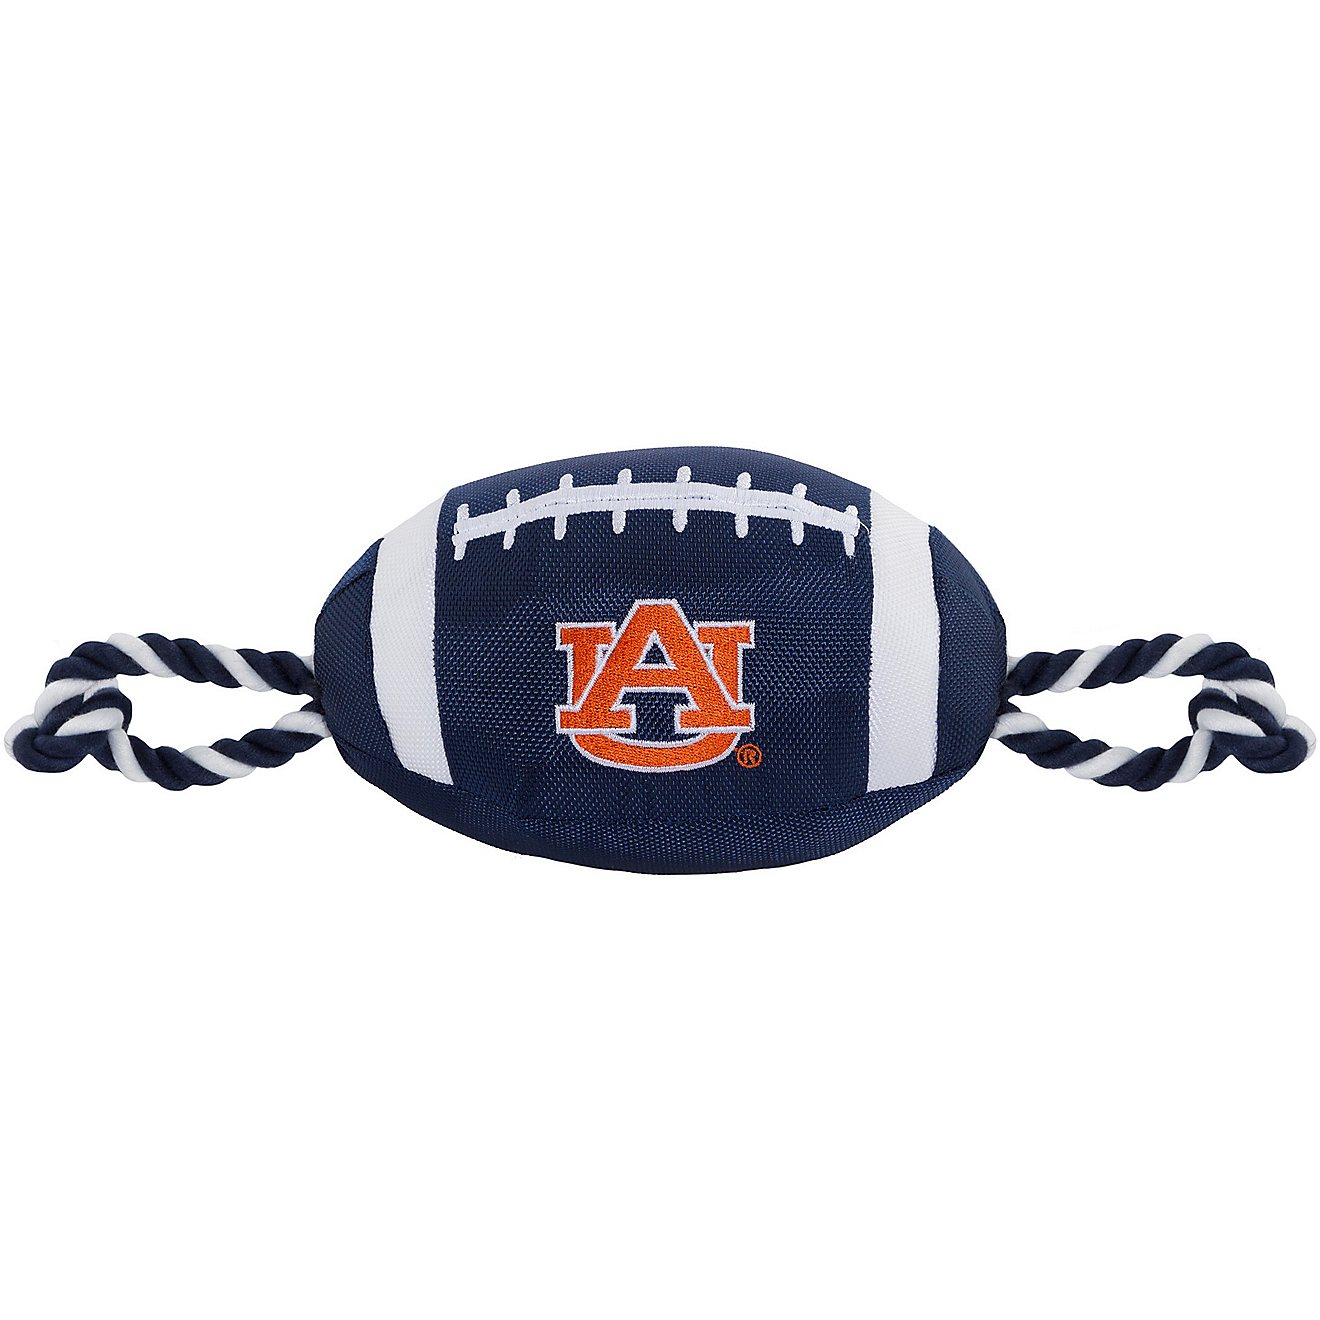 Pets First Auburn University Nylon Football Rope Toy                                                                             - view number 1